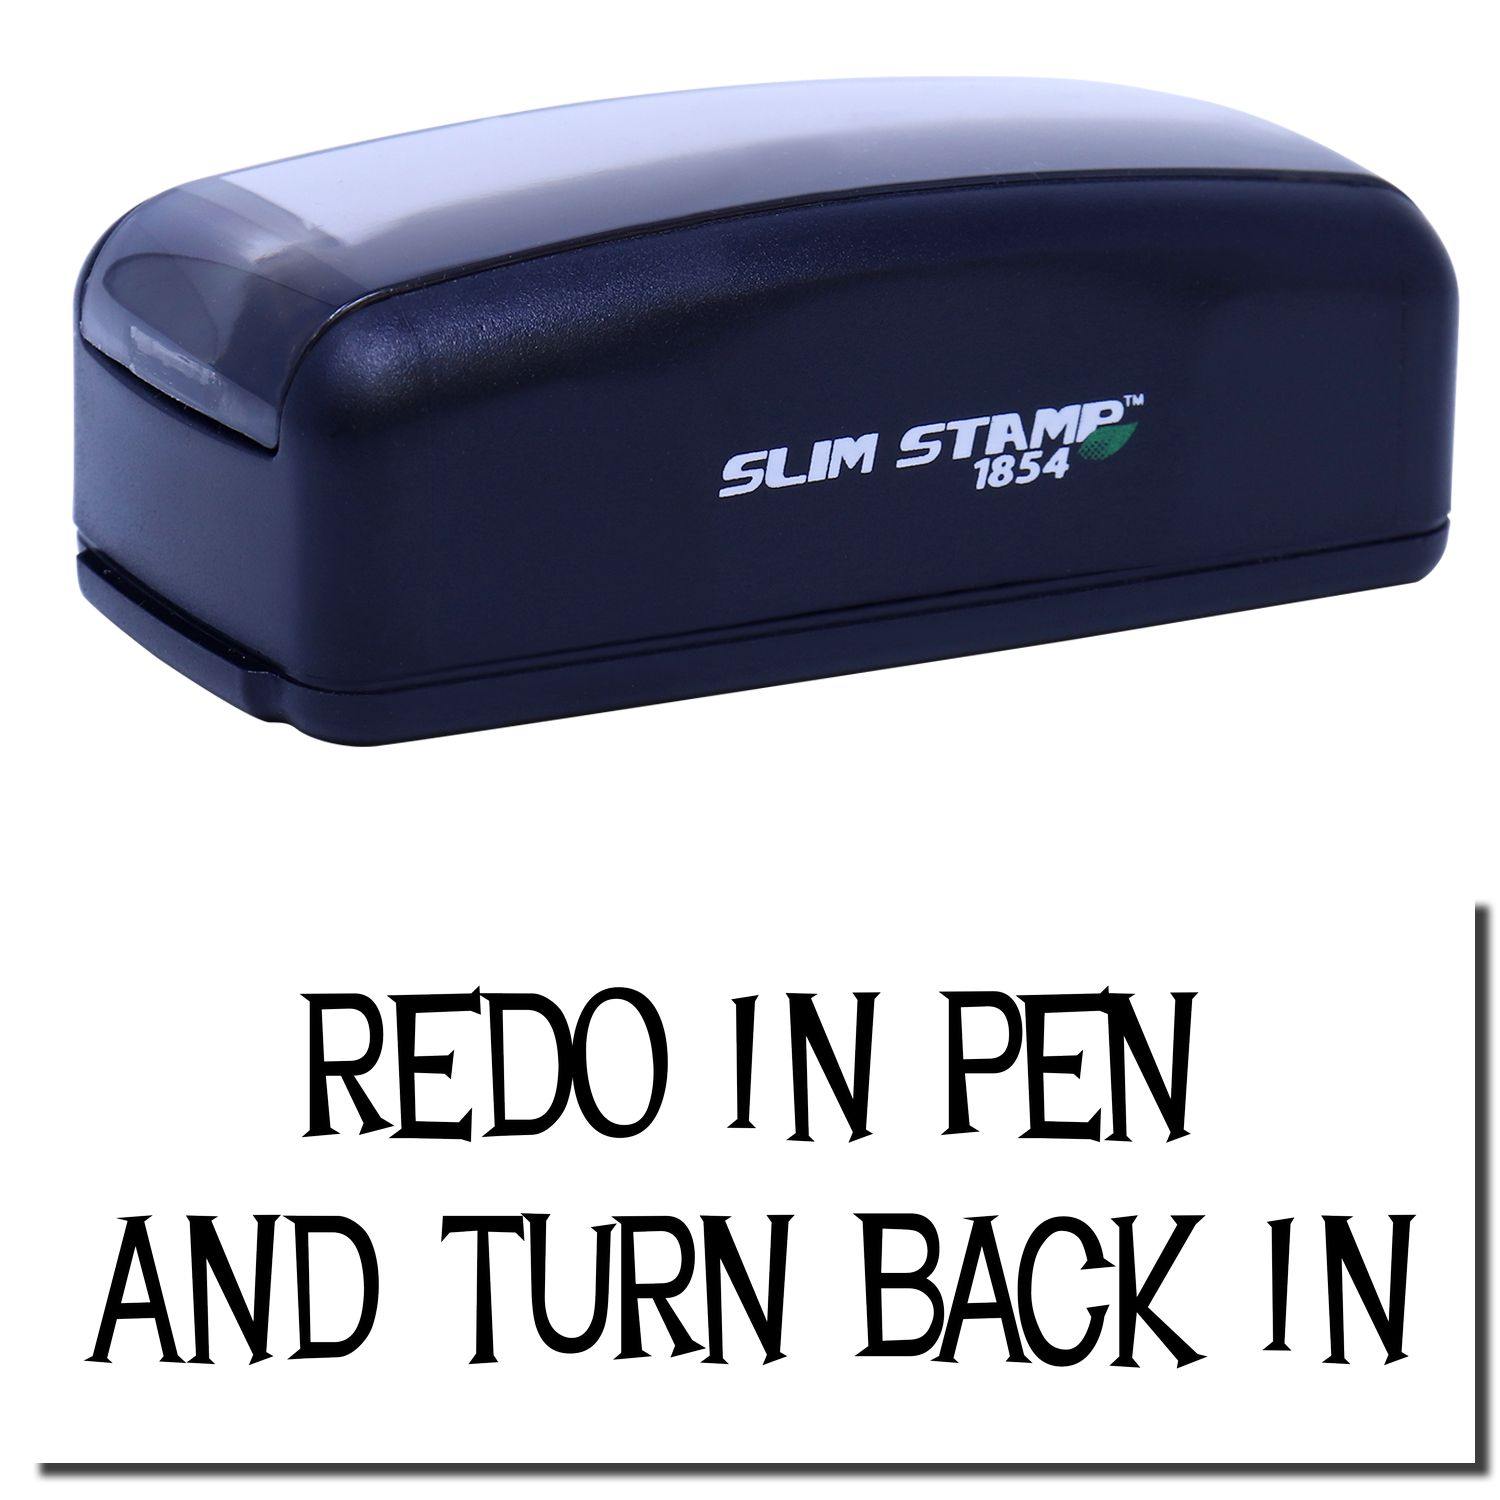 A stock office pre-inked stamp with a stamped image showing how the text "REDO IN PEN AND TURN BACK IN" in a large font is displayed after stamping.